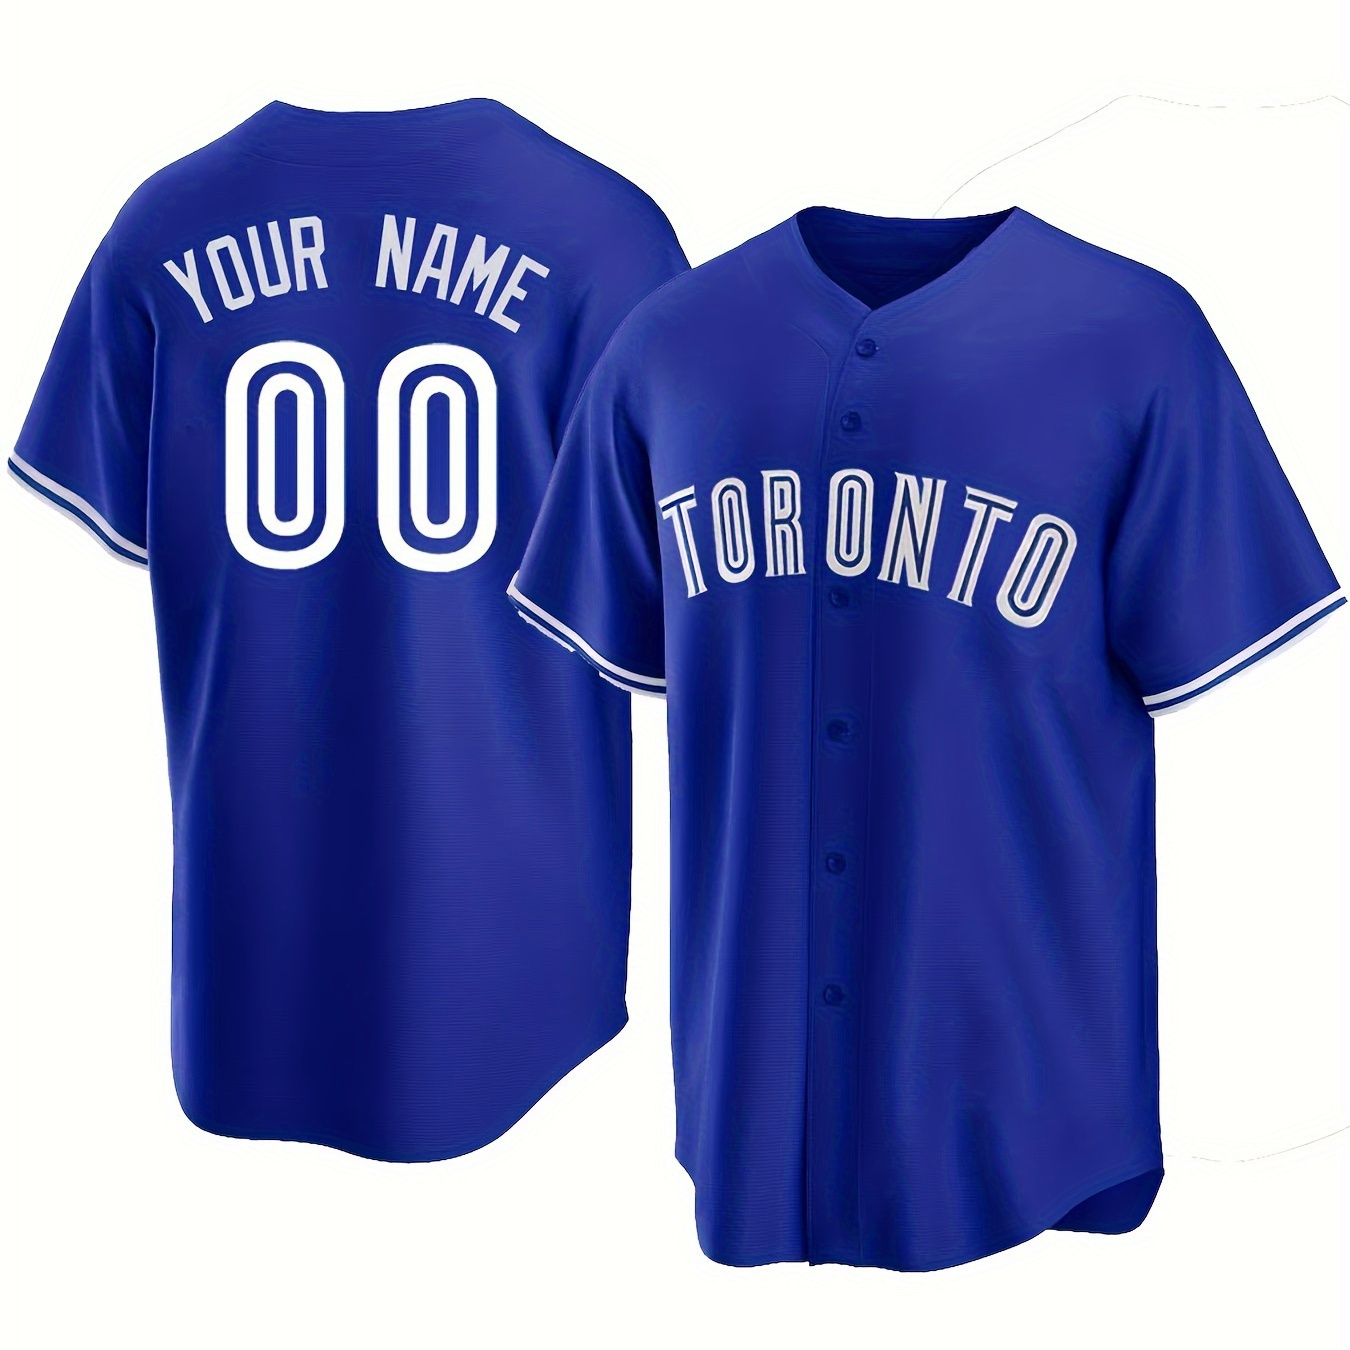 

Customized Name And Number Design, Men's Short Sleeve Button Up V-neck Toronto Embroidery Baseball Jersey For Team Training And Competition